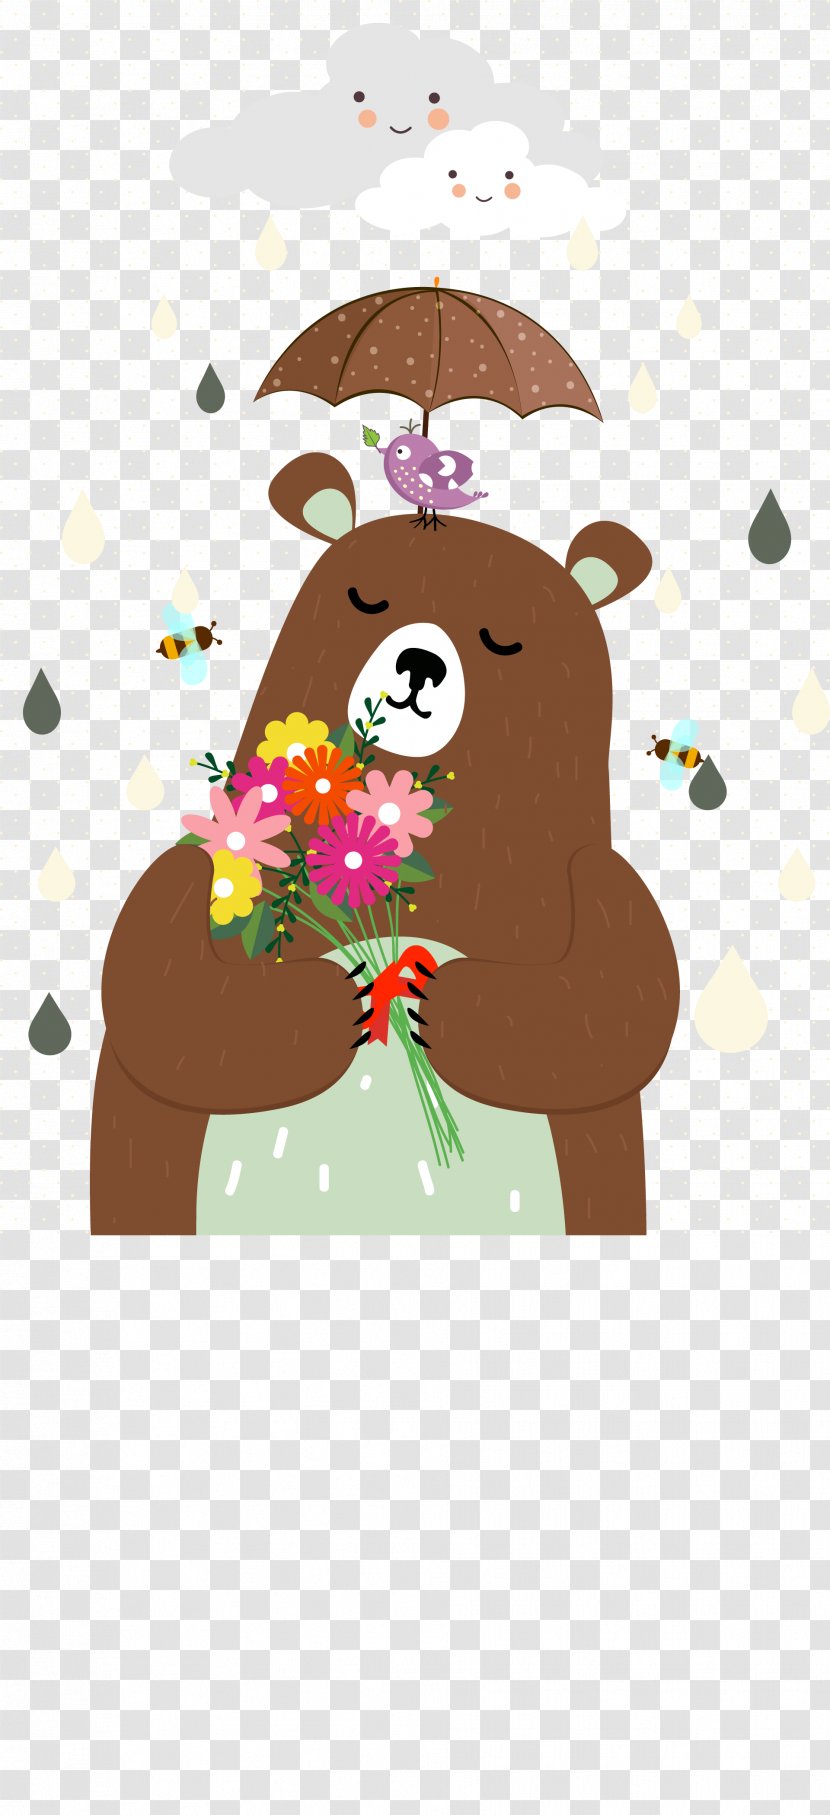 Brown Bear Animal Illustration - Pattern - Animals With Flowers Transparent PNG